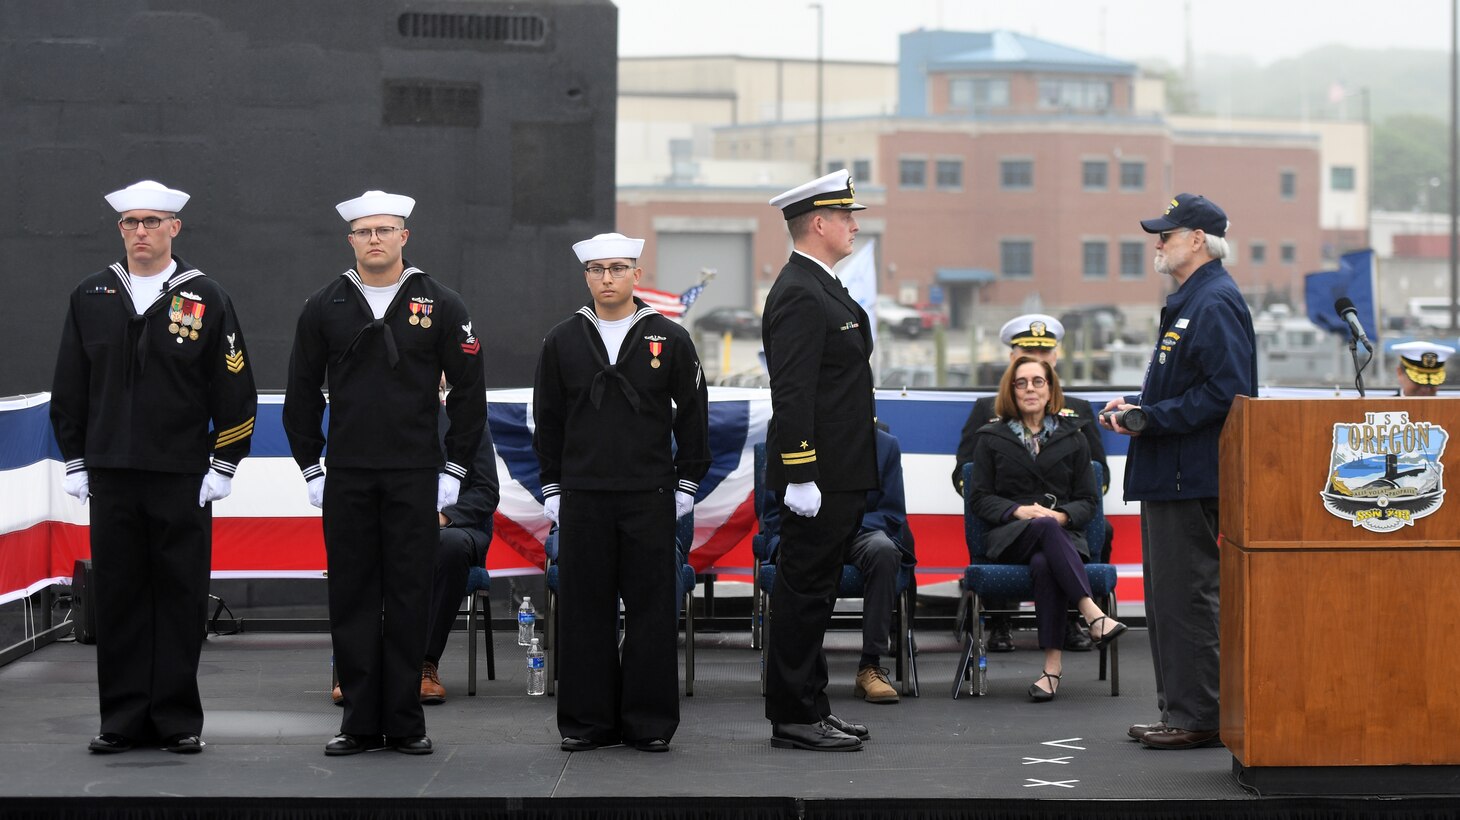 Retired Senior Chief Petty Officer Arlo Gatchel, right, passes a long glass to Lt. Thomas Mc Sweeny, who ceremonially set the “first watch” during a commissioning ceremony for the Virginia-class fast attack submarine USS Oregon (SSN 793) in Groton, Conn., May 28, 2022.